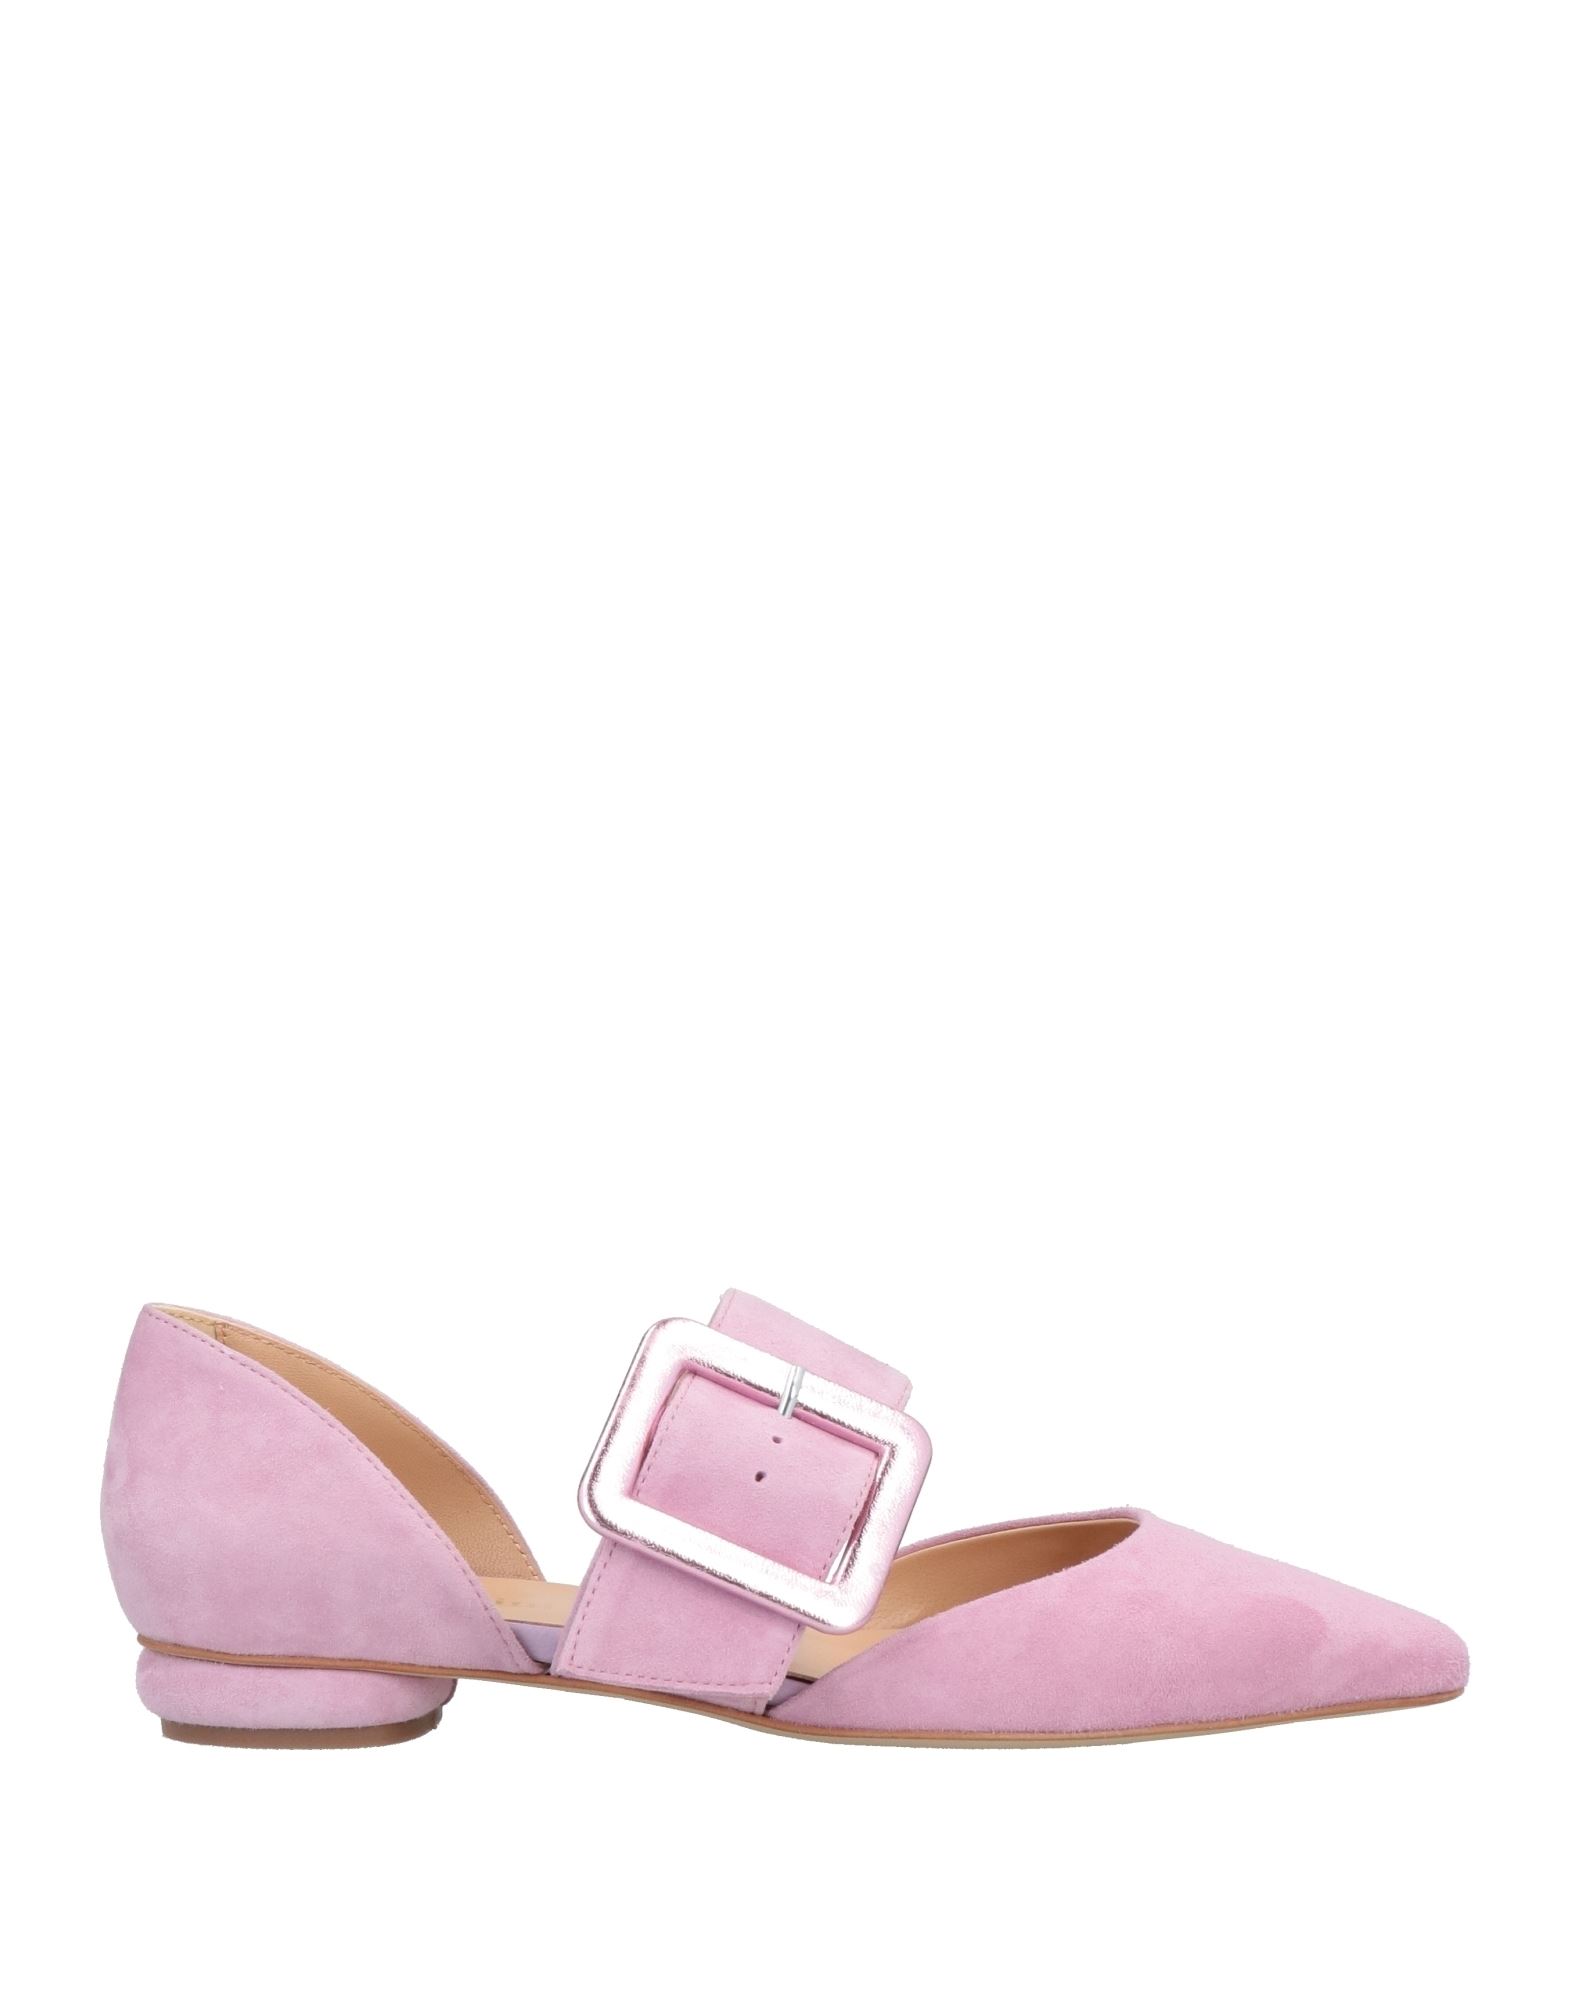 Formentini Ballet Flats In Pink